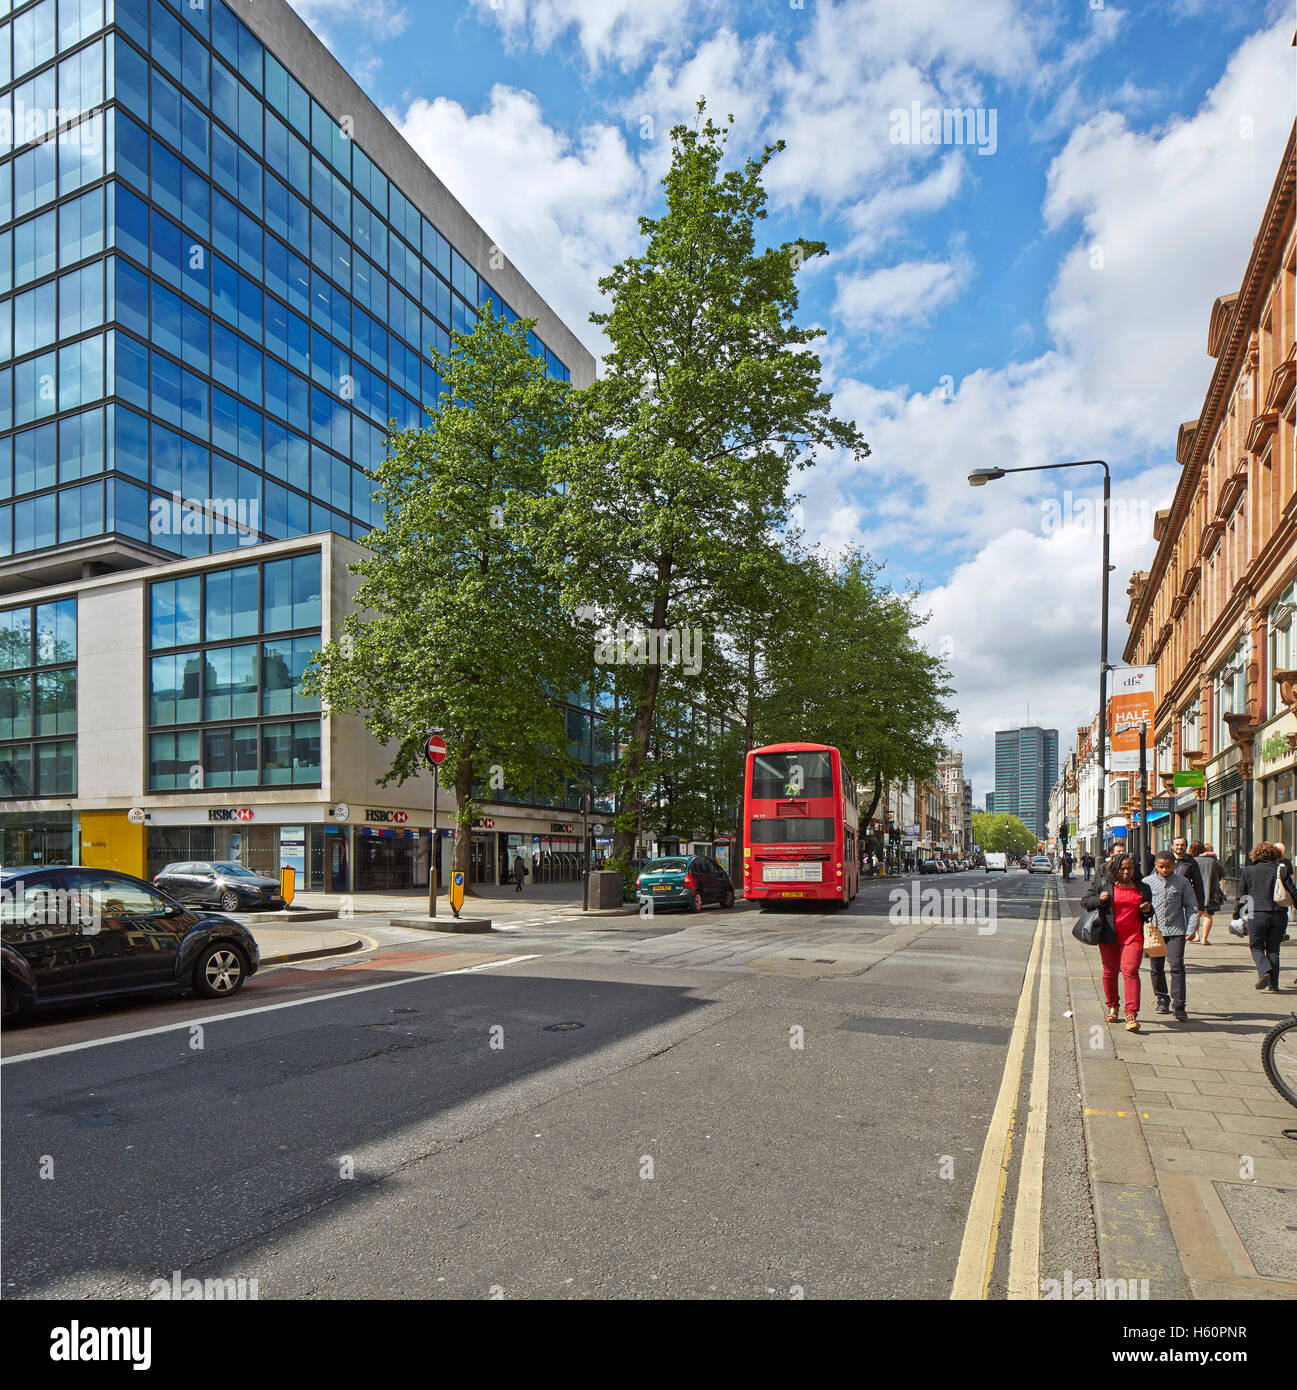 Typical London street scenes around Centre Point and Tottenham Court Rd. Streets of London, London, United Kingdom. Architect: n/a, 2015. Stock Photo